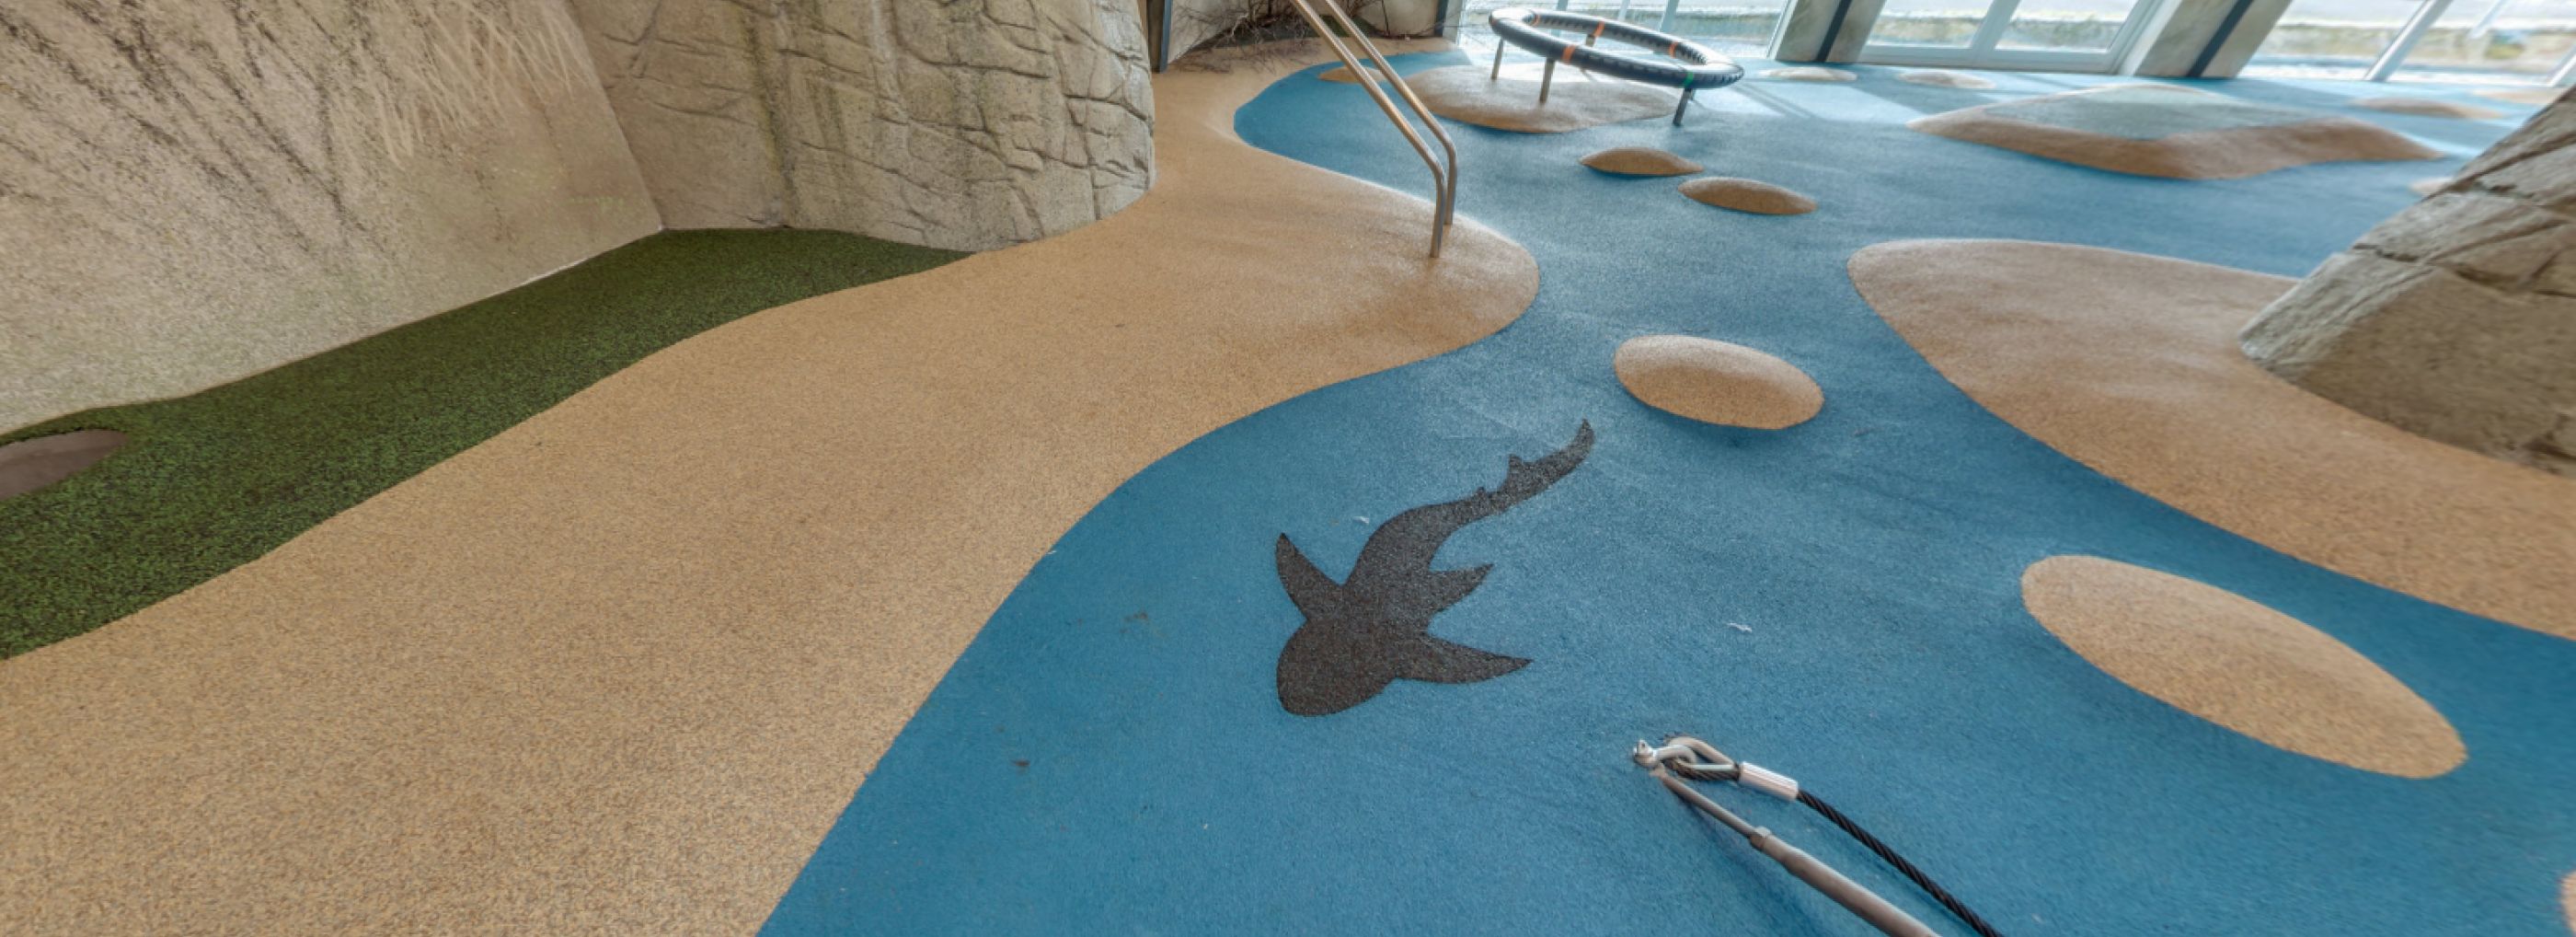 Indoor playground designed to look like a beach with a blue colour for water and sandy brown colour for the beach with a silhouette of a shark in black.